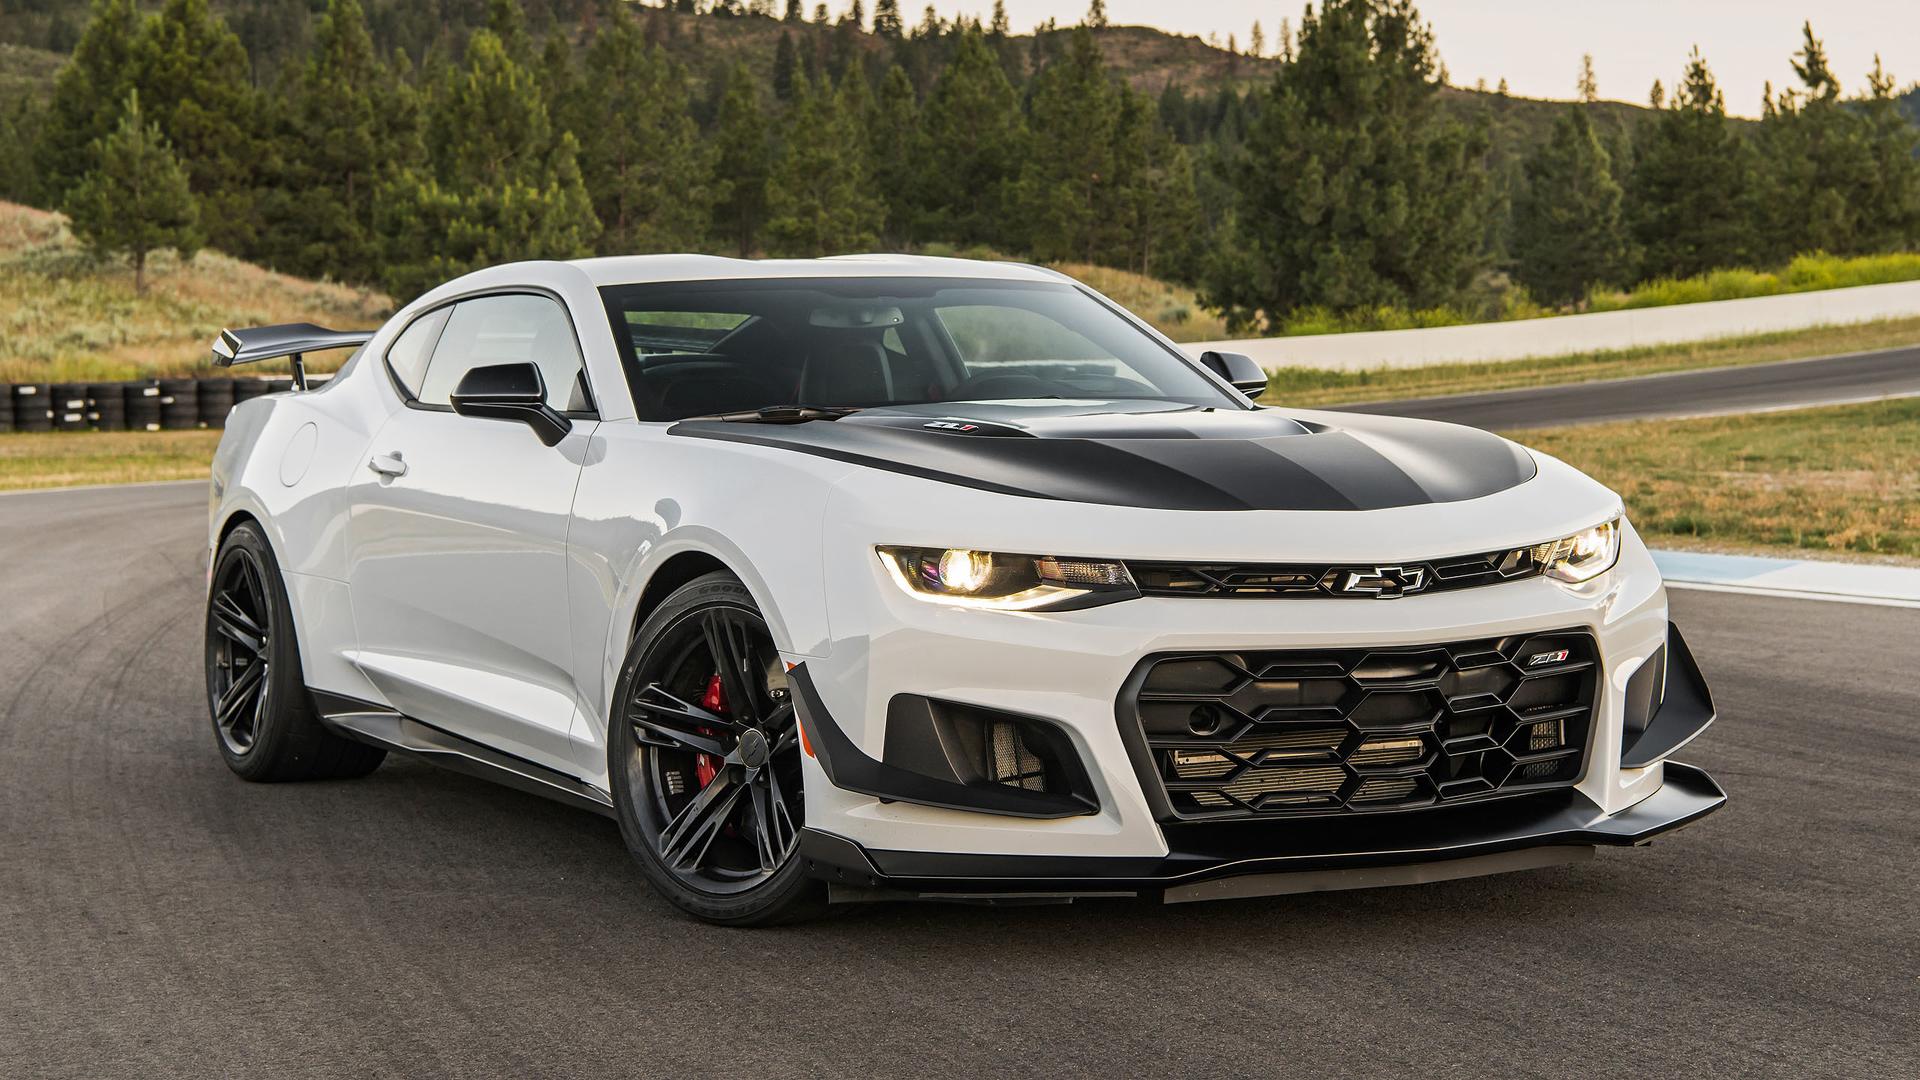 Chevy Camaro ZL1 1LE First Drive: Best Of The Breed